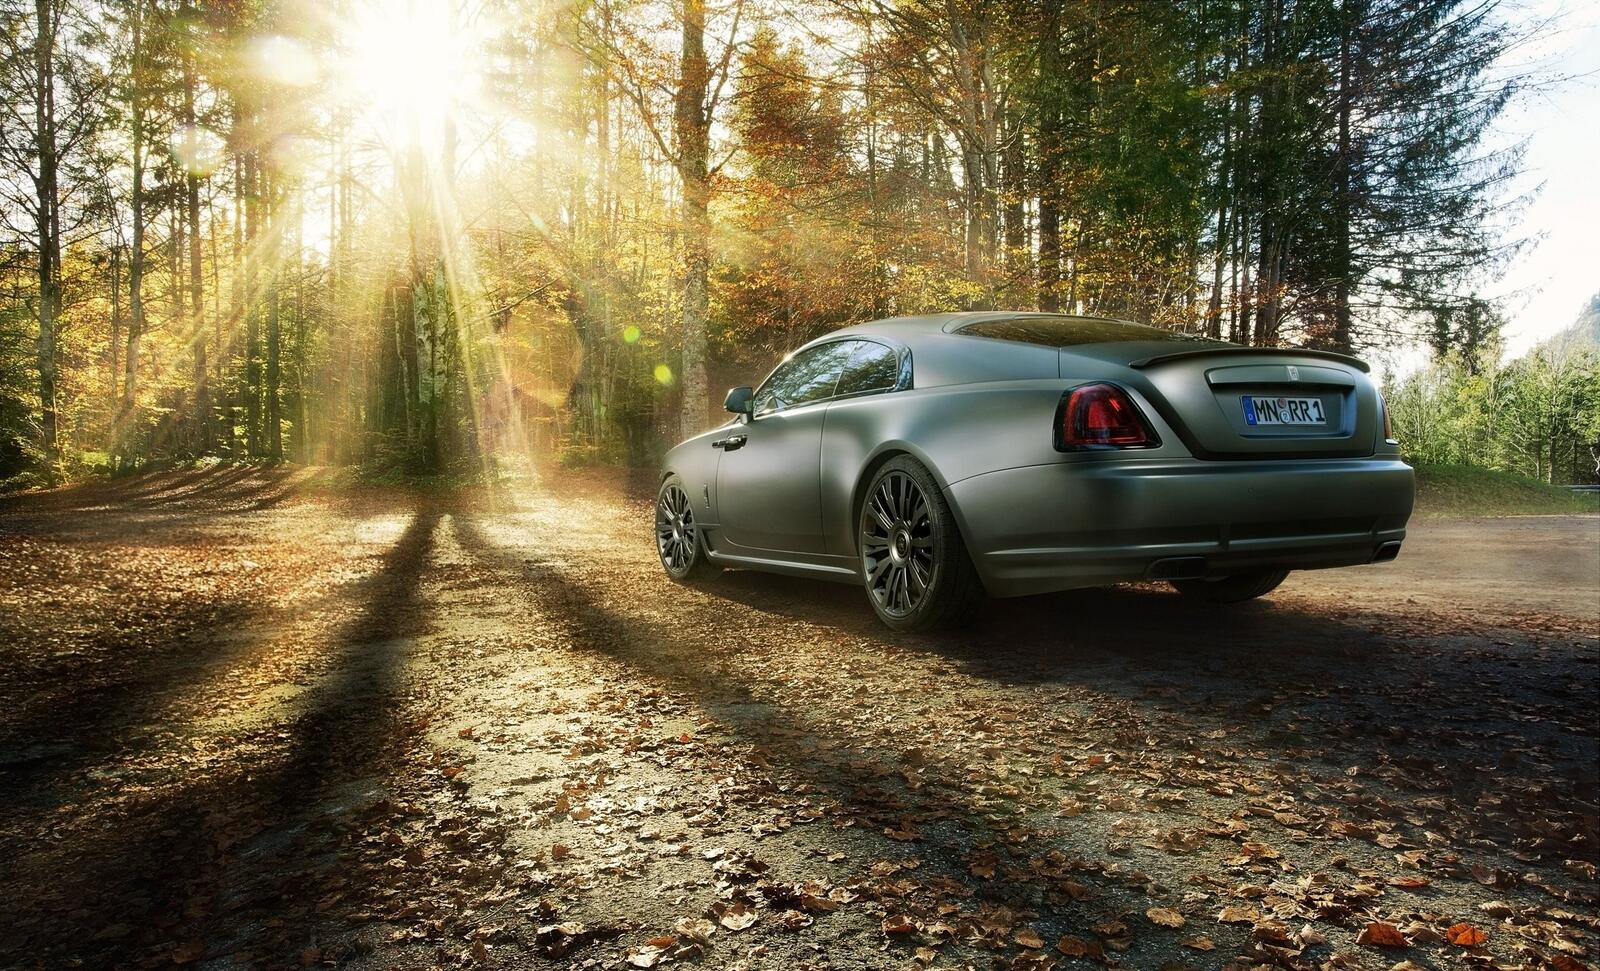 Free photo The Rolls Royce Wraith stands in the woods in the sunlight.